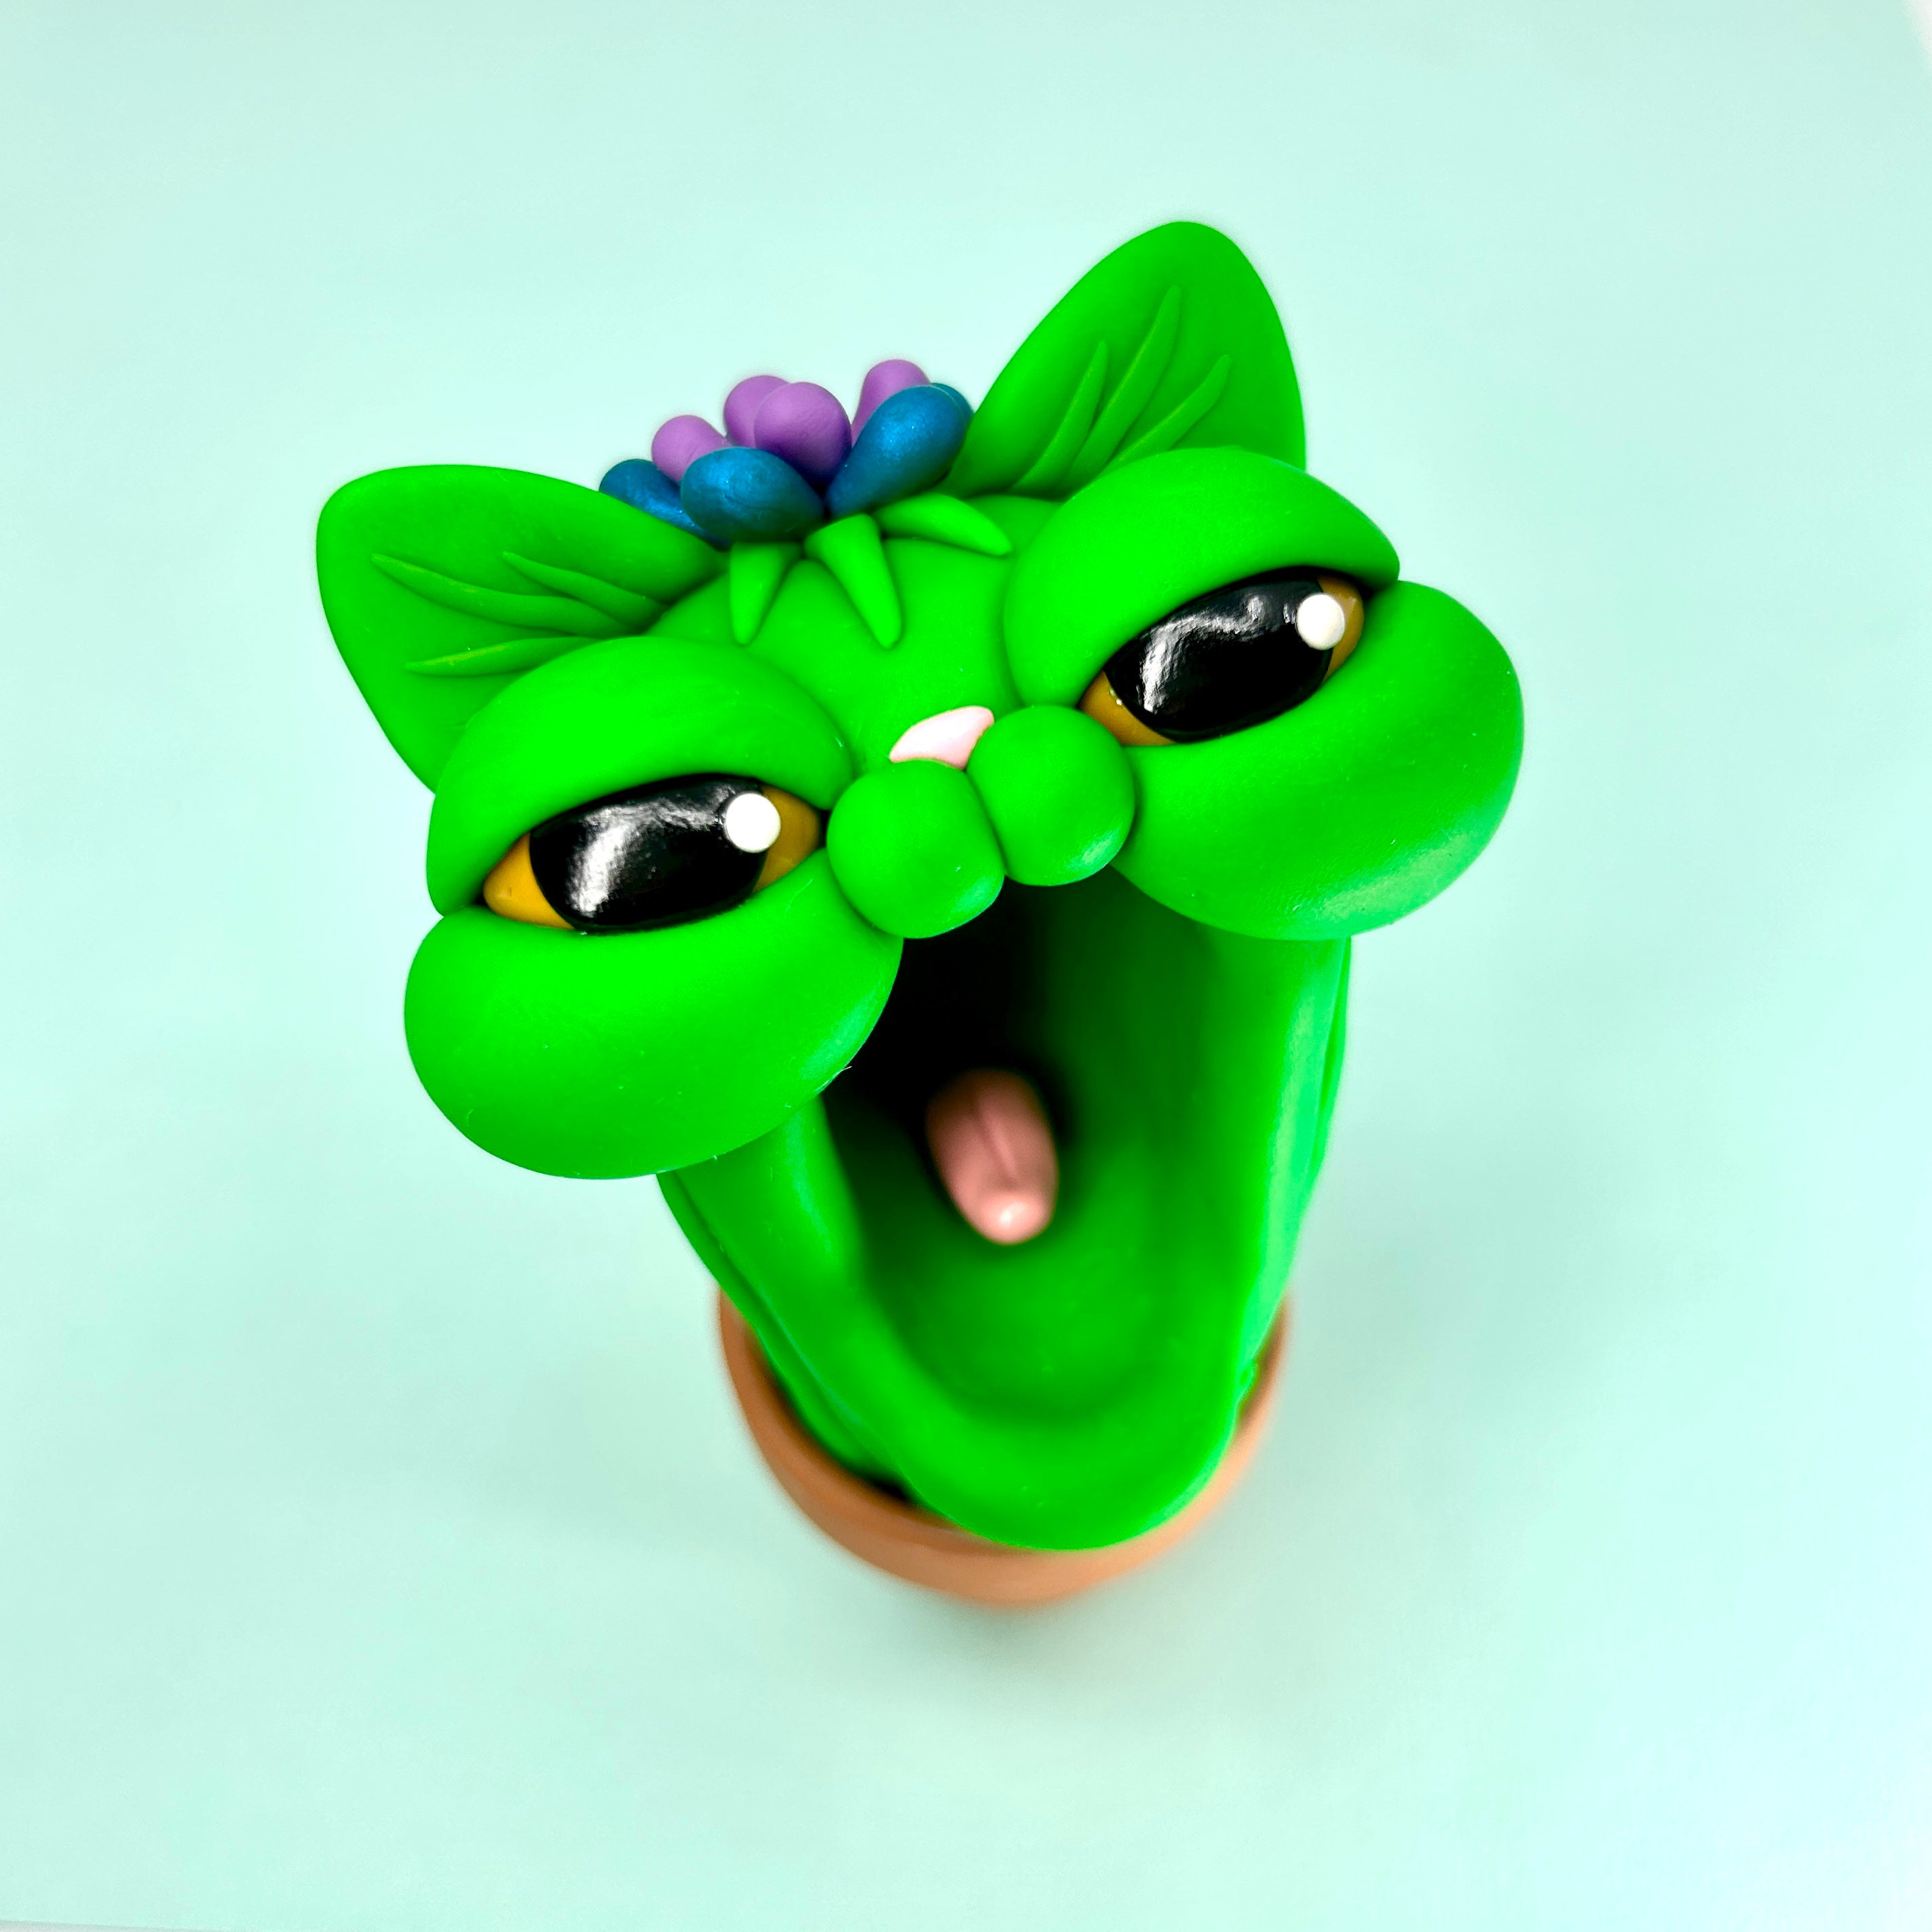 Polymer clay toy of green cat head with mouth open, part of Simon Says Macy & Friends collection.